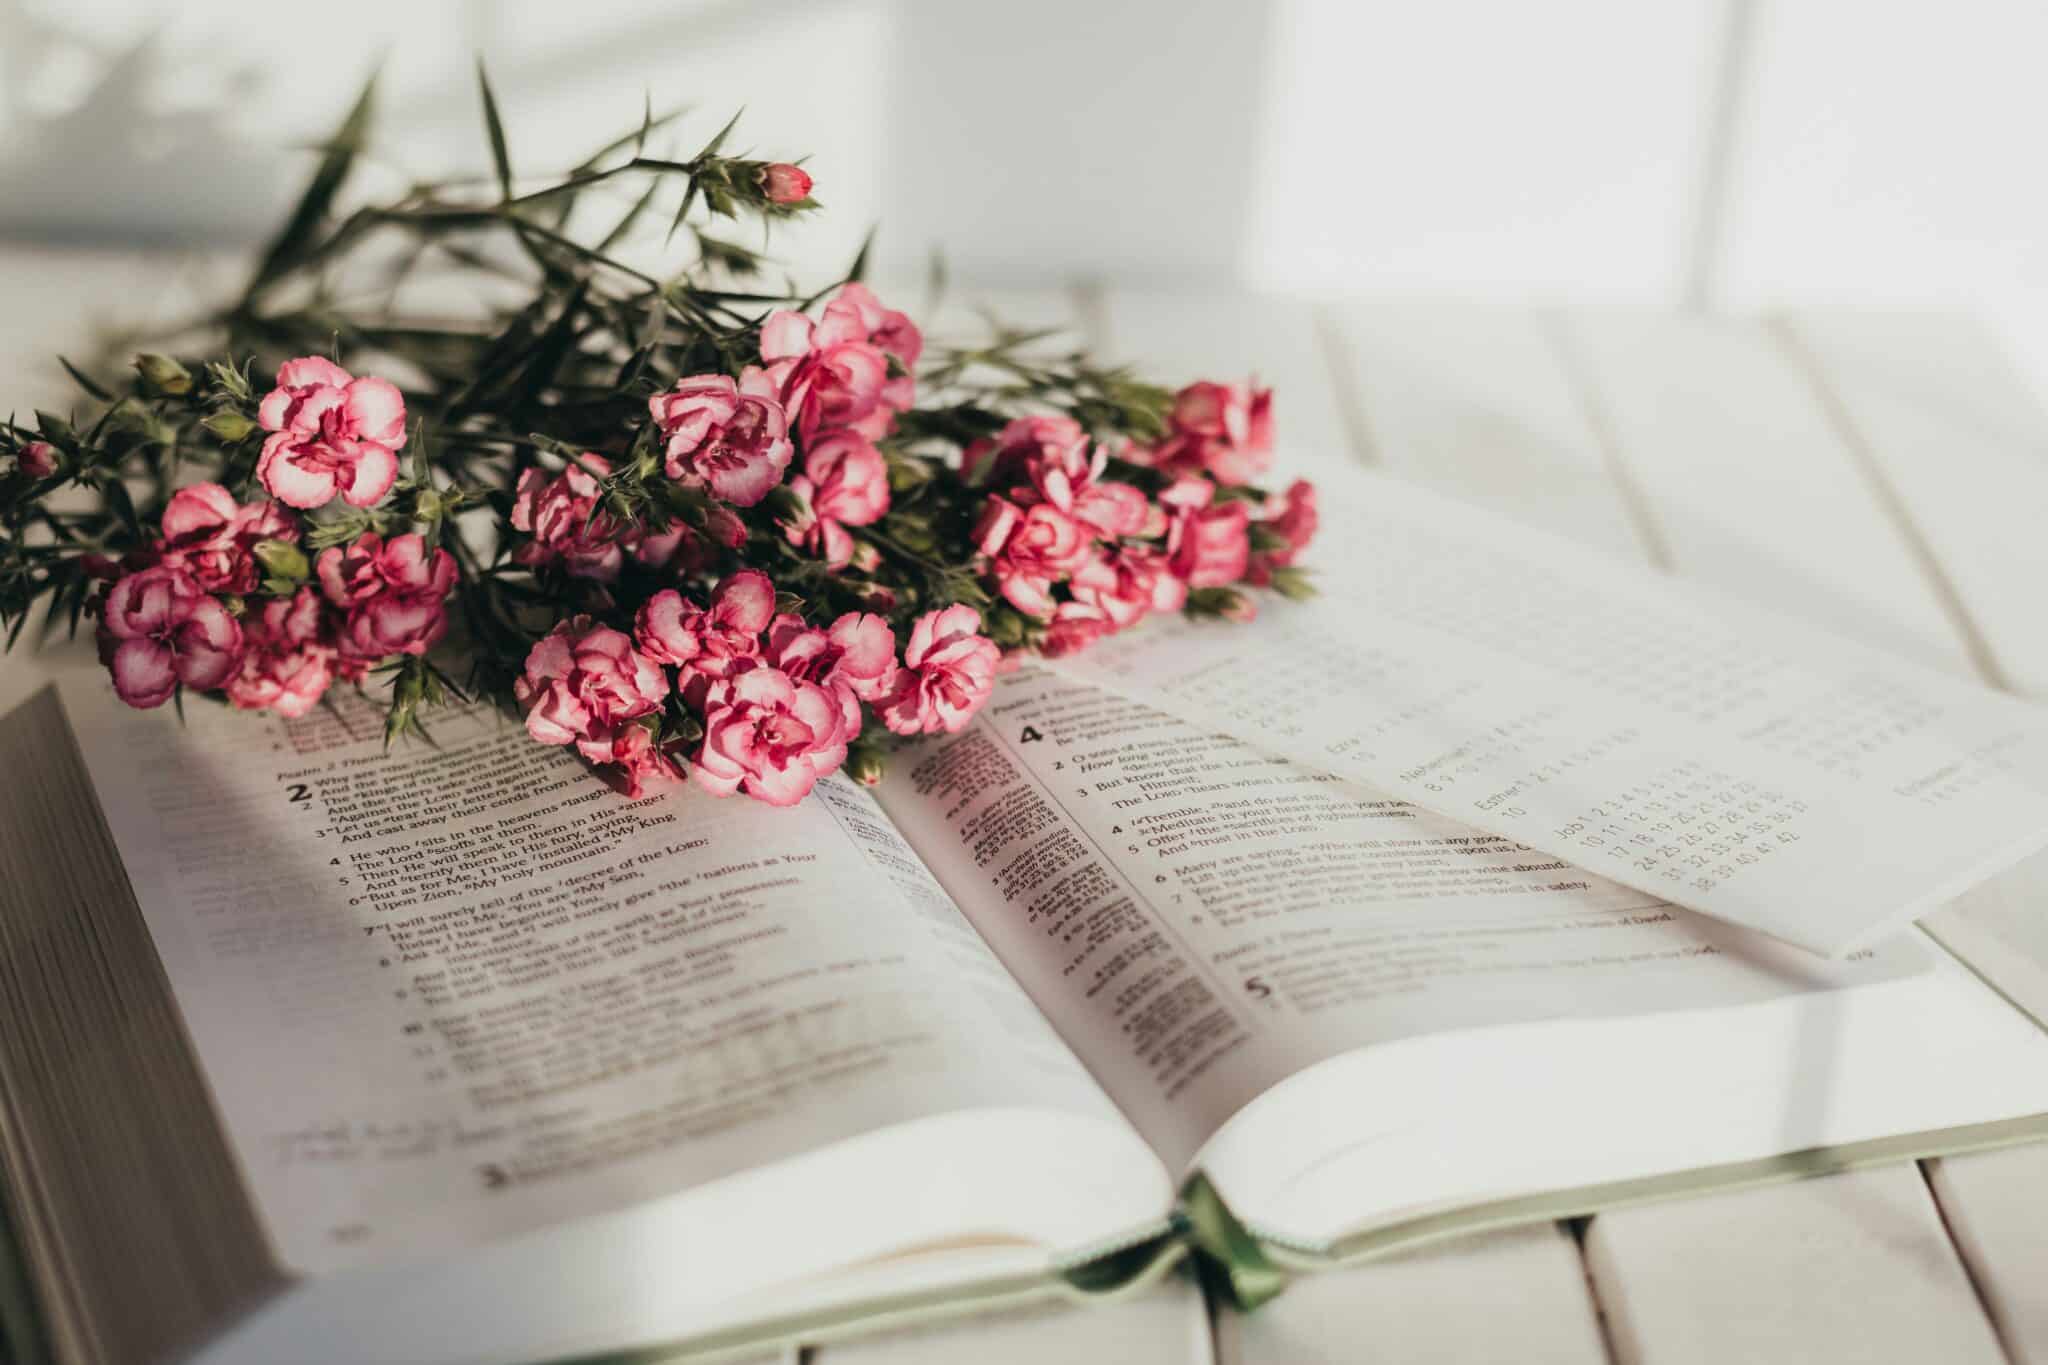 The Bible with flowers